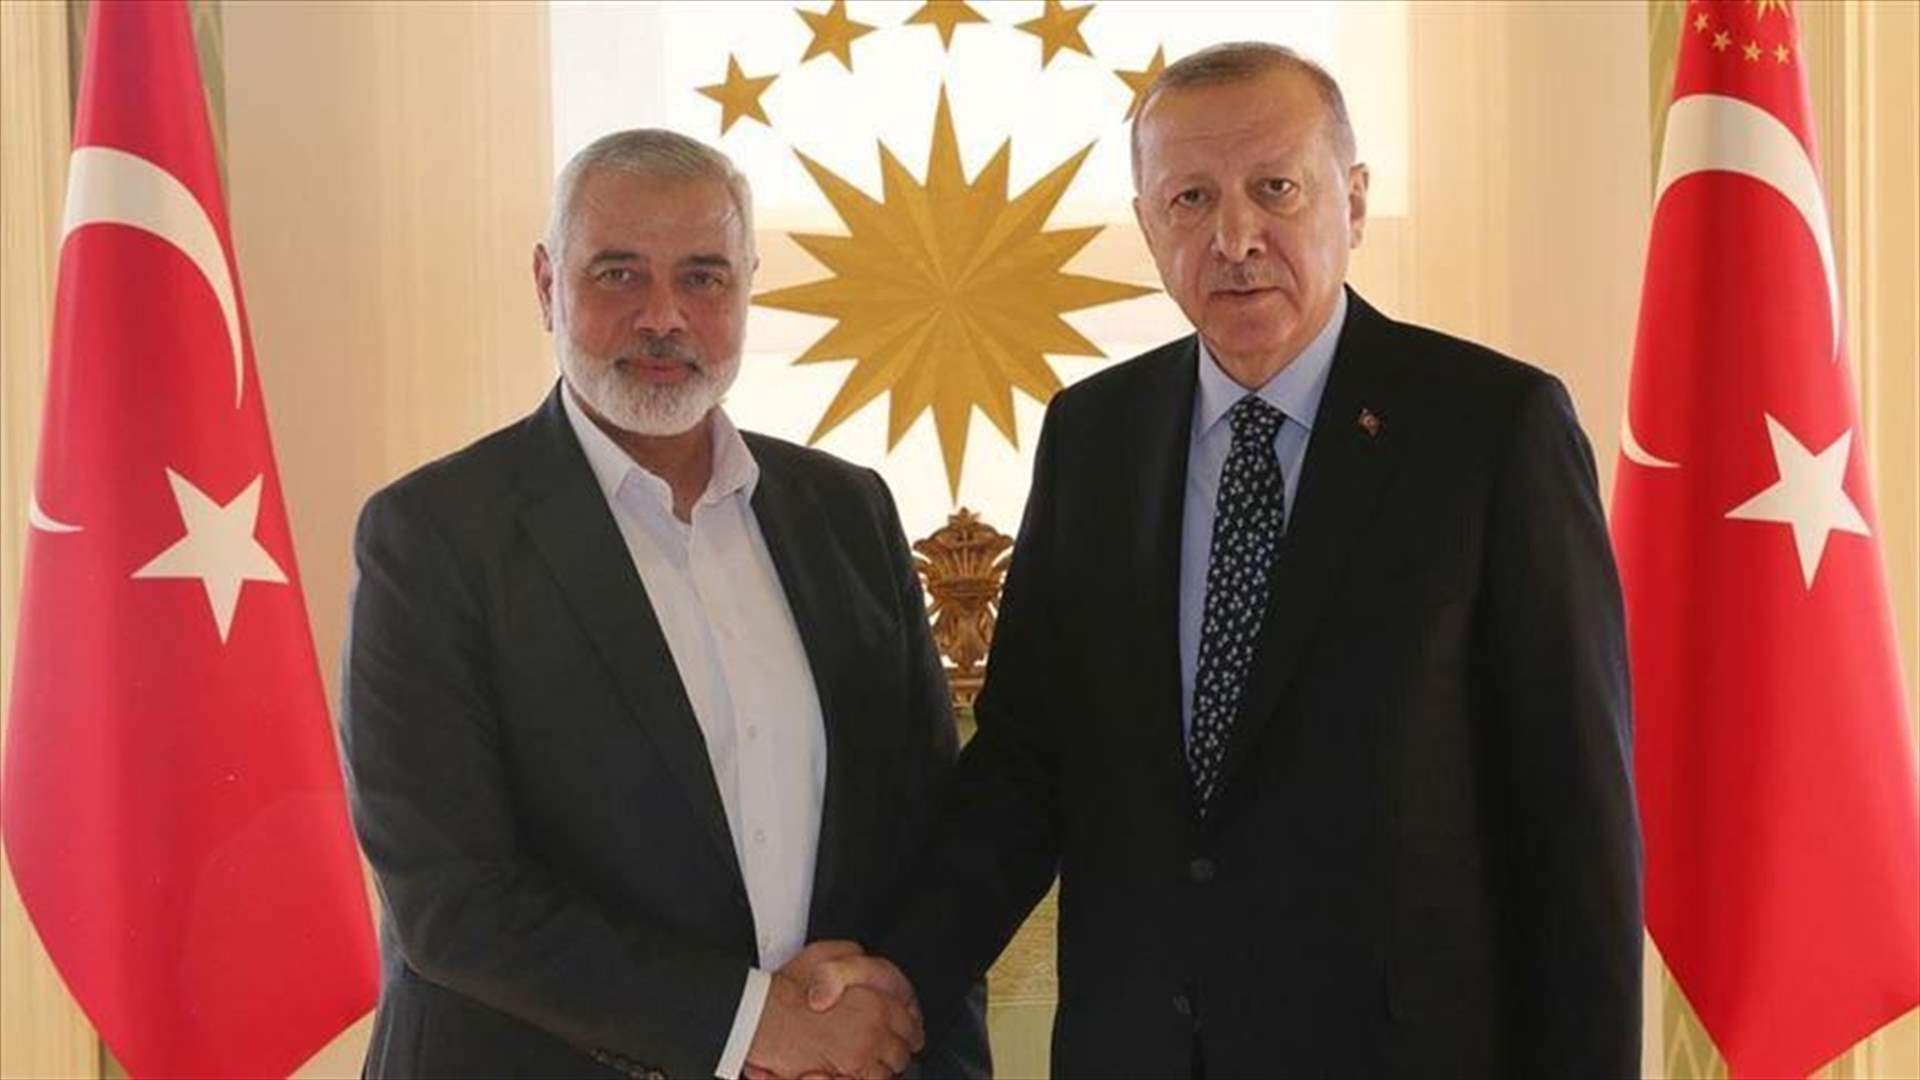 Secret diplomacy: Hamas and Turkey discuss hostage release and ceasefire